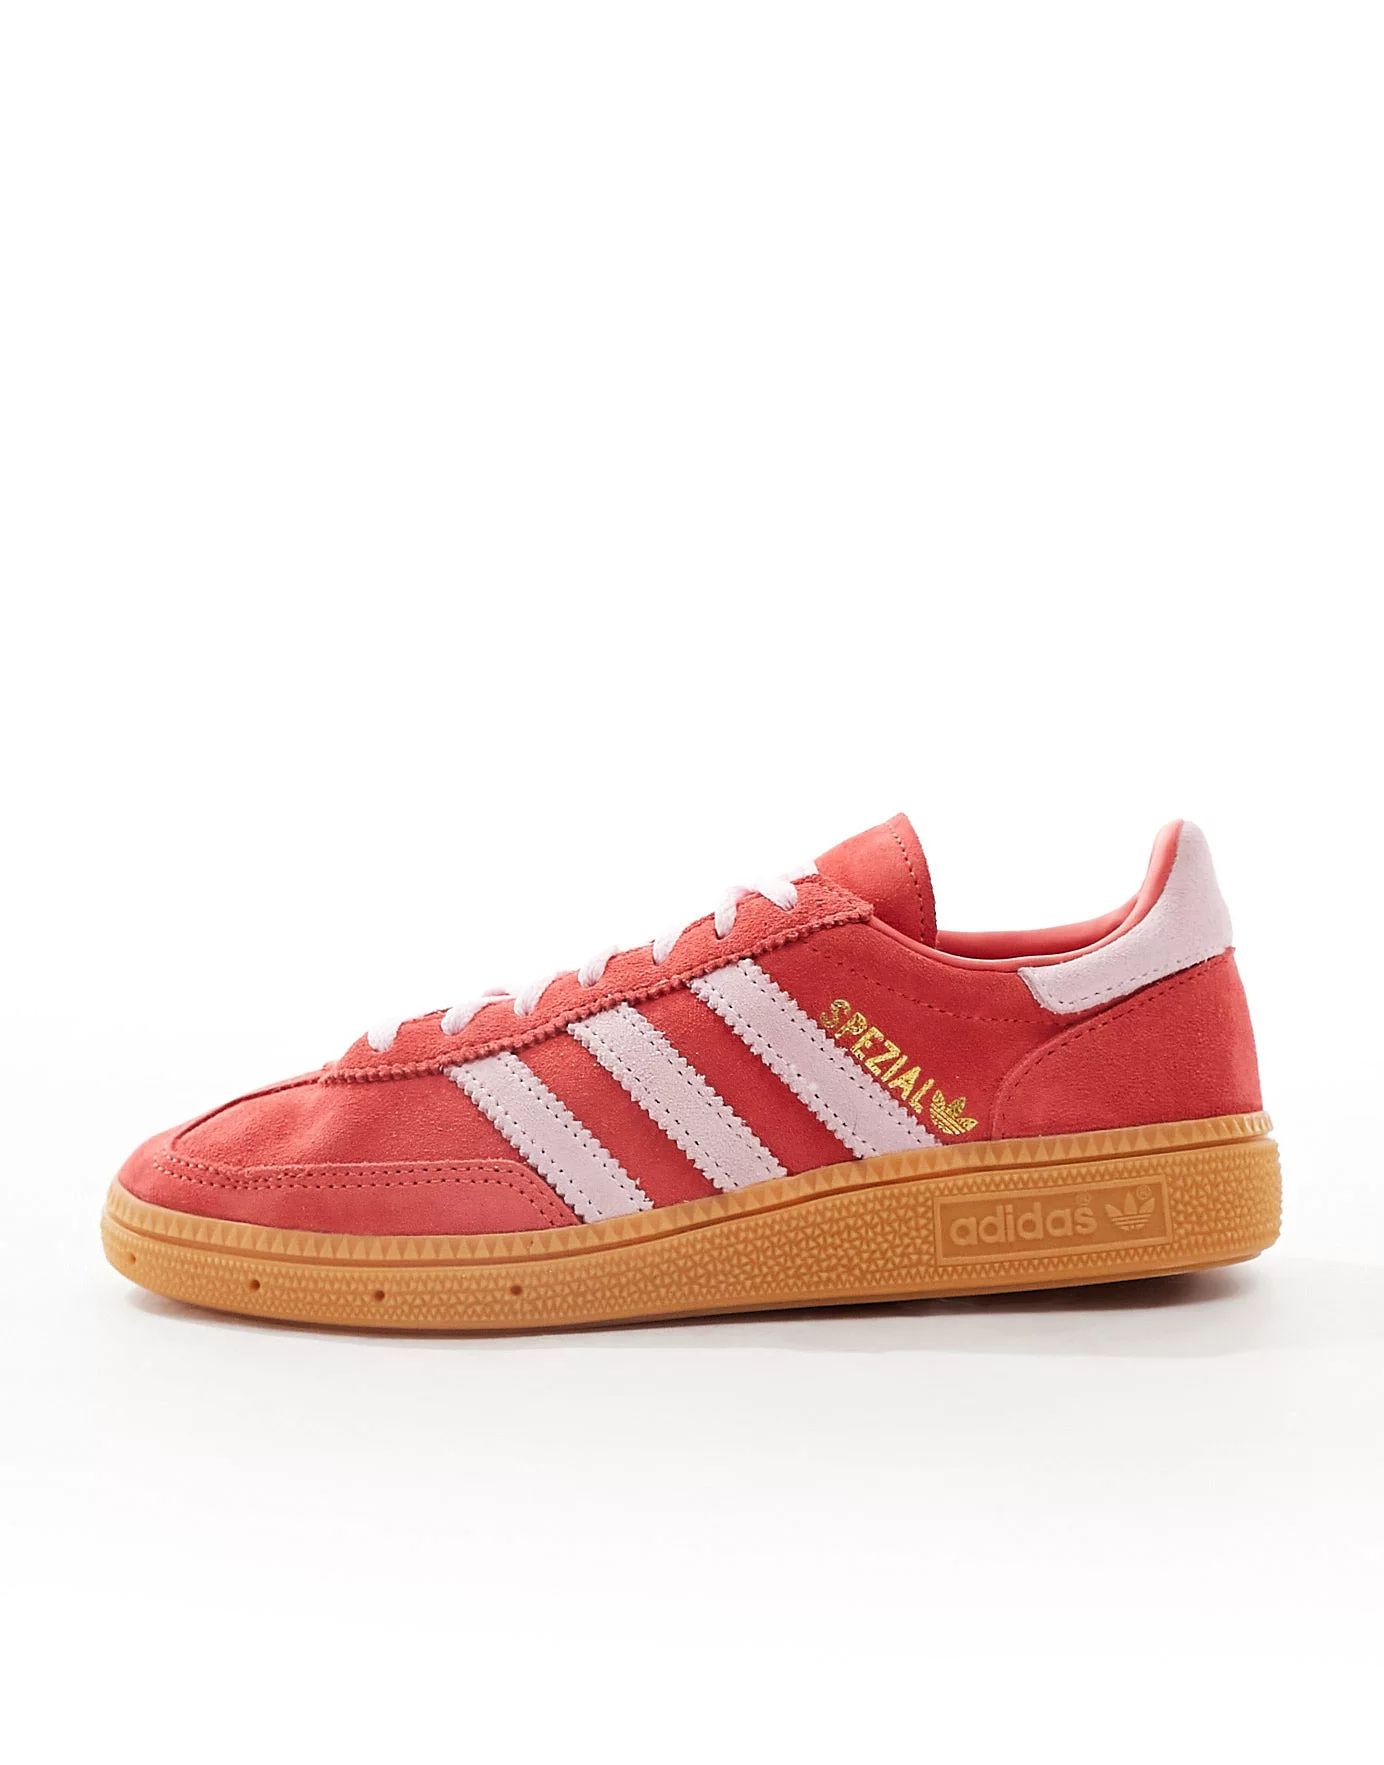 adidas Originals Handball Spezial trainers in red and pink | ASOS (Global)